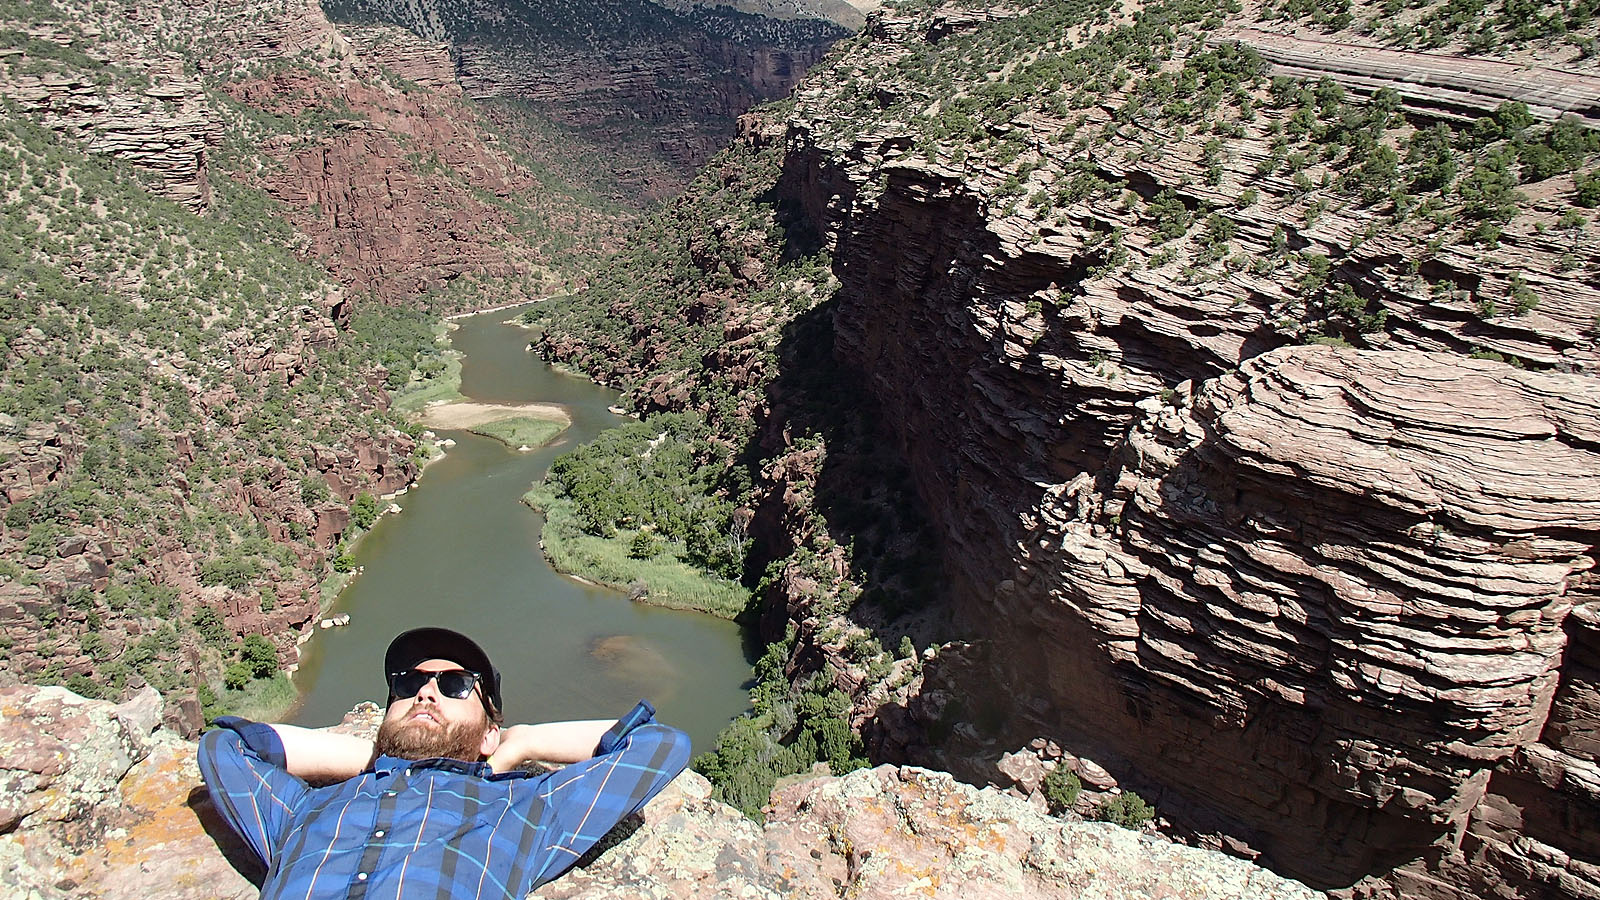 Chilling on the Limestone hike overlooking the Green River in Dinosaur National Monument